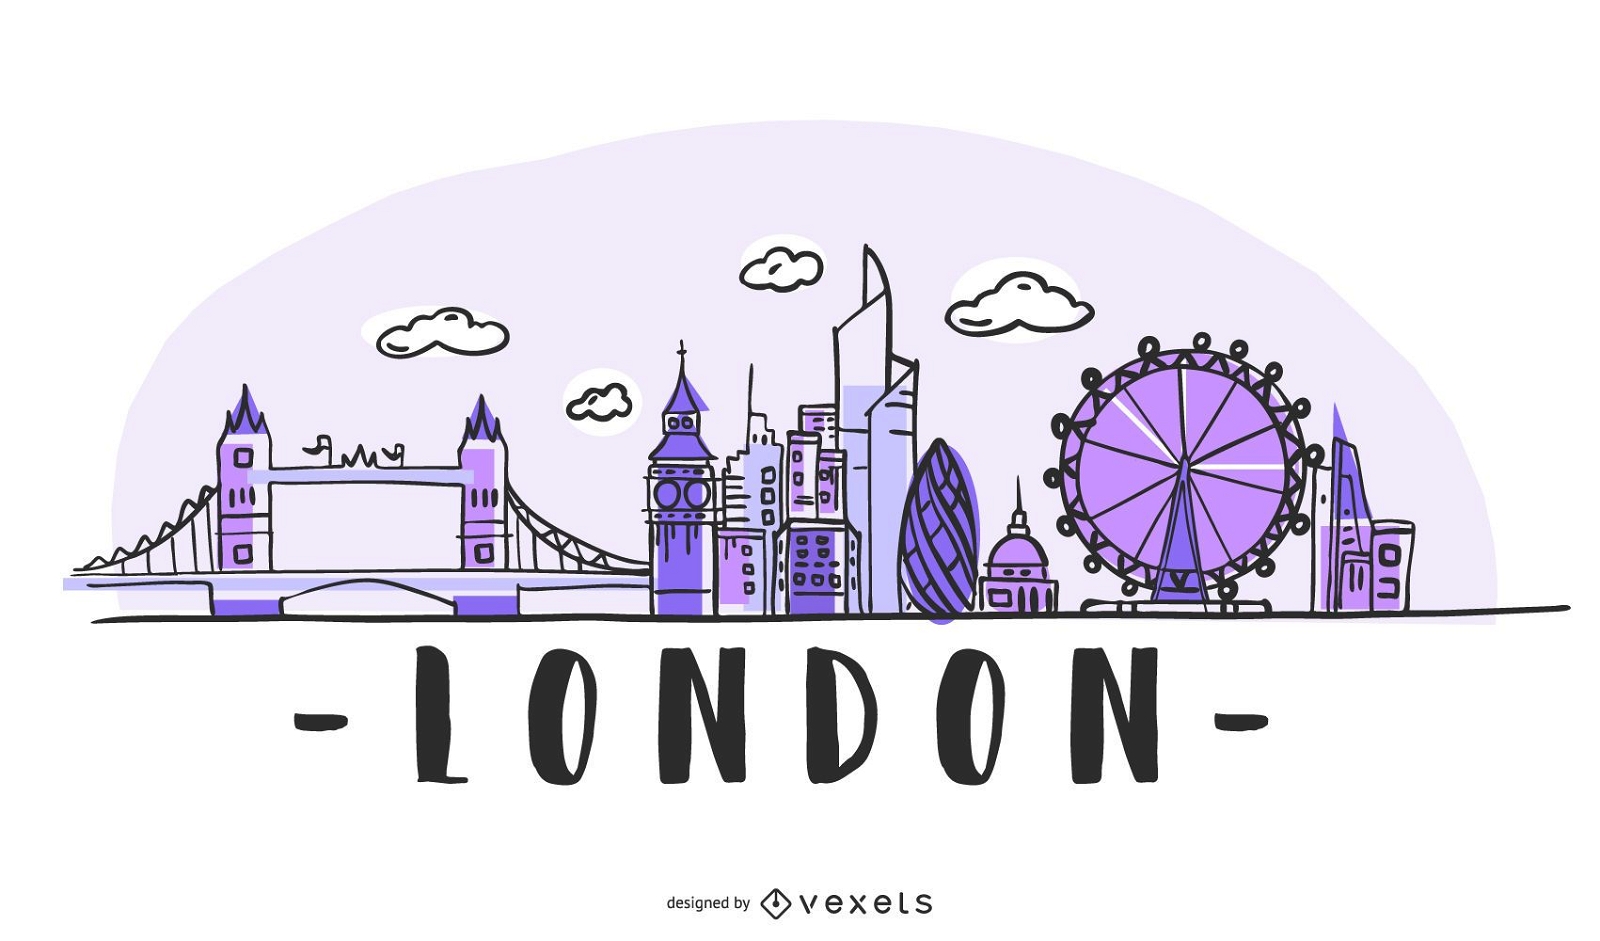 The London City Guide картина